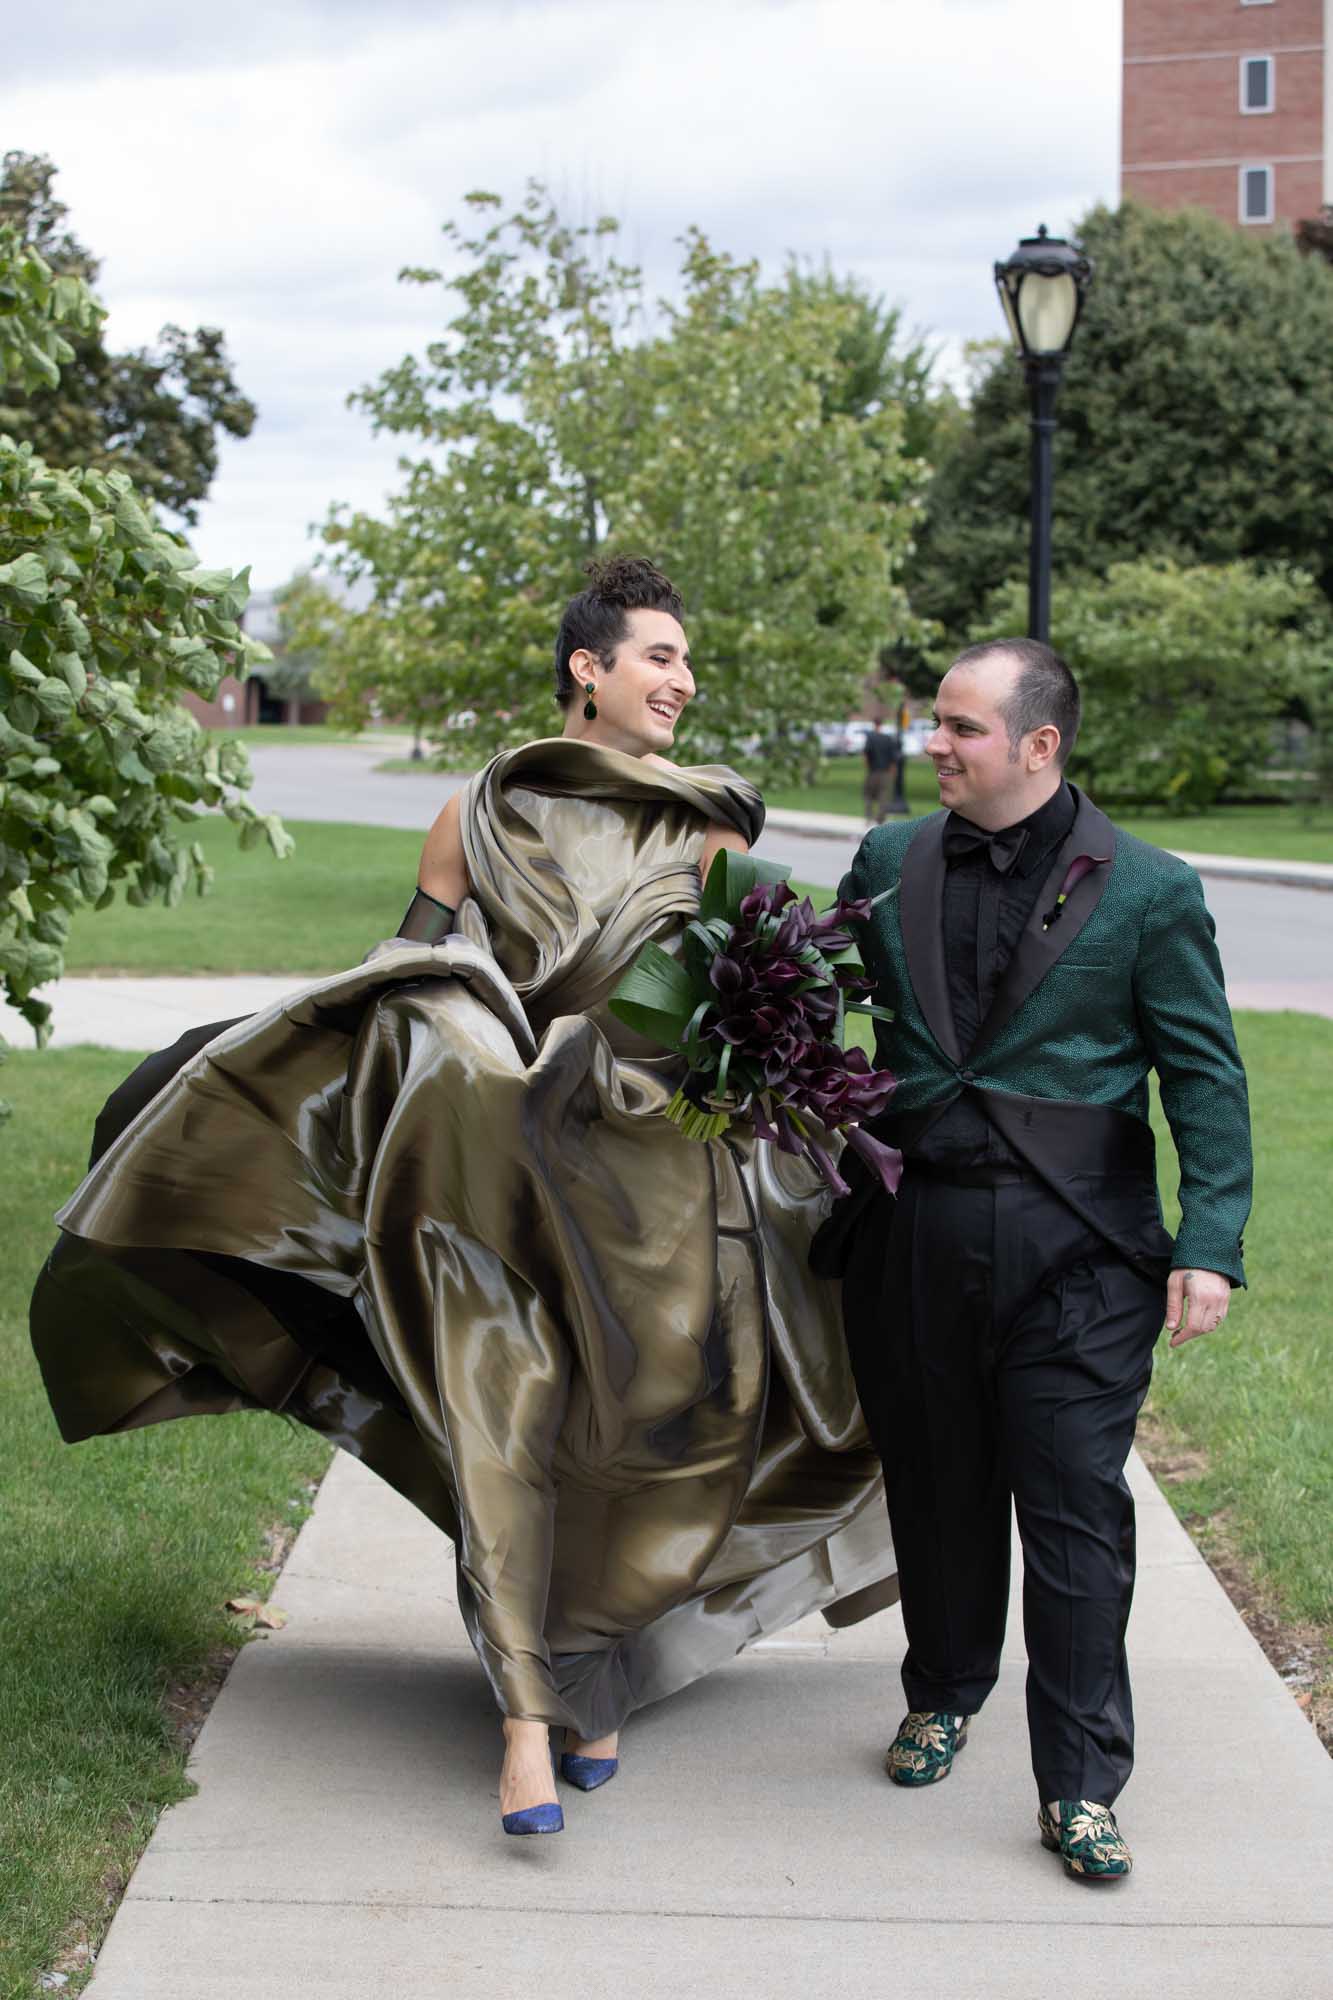 Glamorous Rupaul's Drag Race-inspired wedding with custom gold gown and emerald tuxedo | Agaton Strom | Featured on Equally Wed, the leading LGBTQ+ wedding magazine